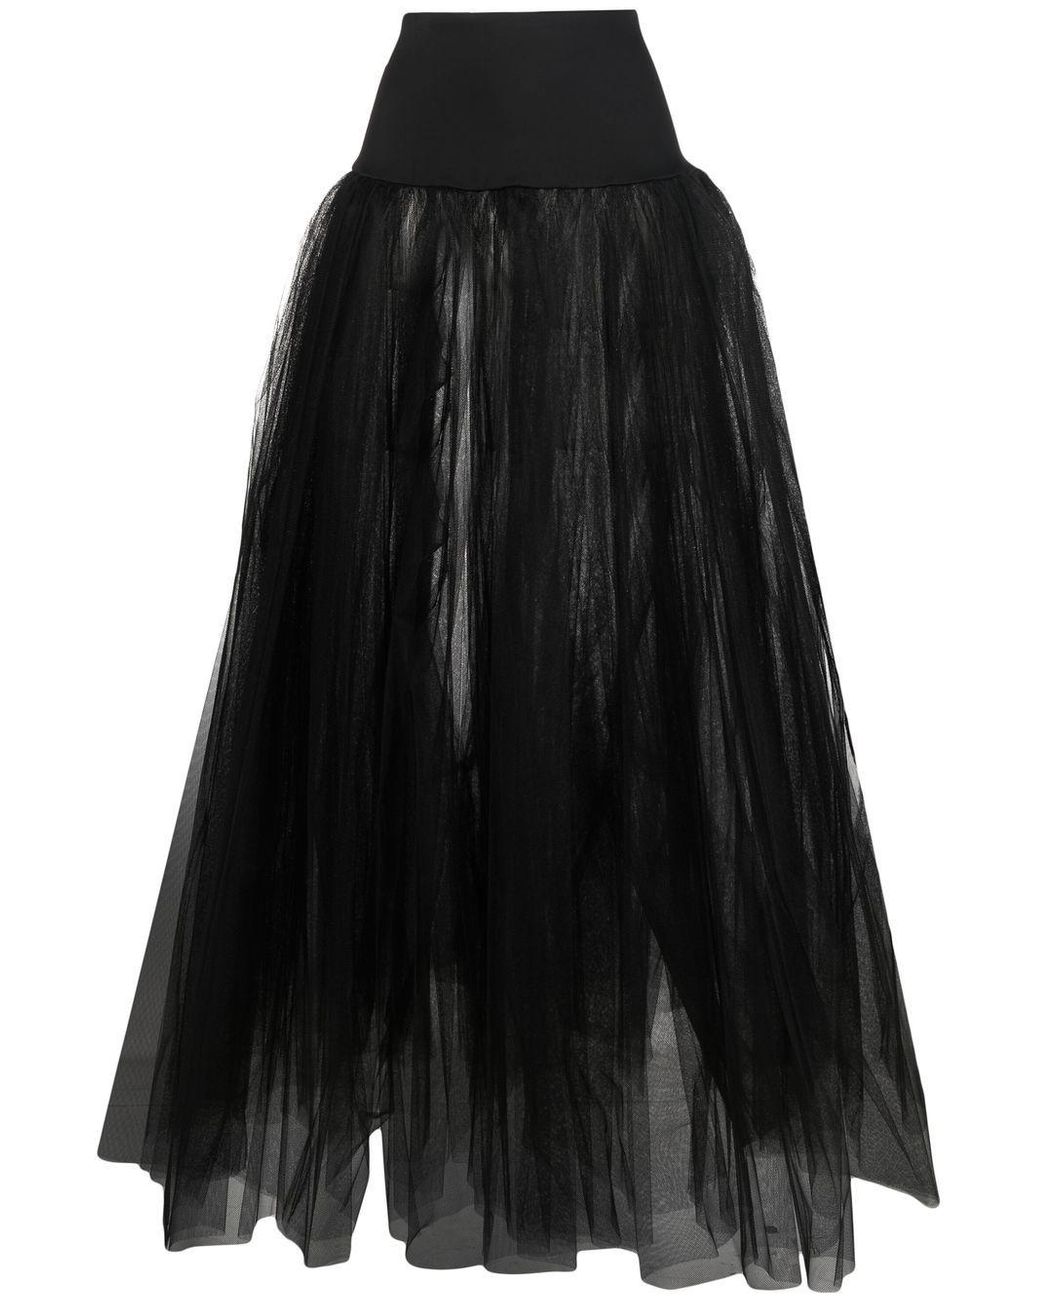 Norma Kamali Tulle High-waisted Petticoat Skirt in Black | Lyst